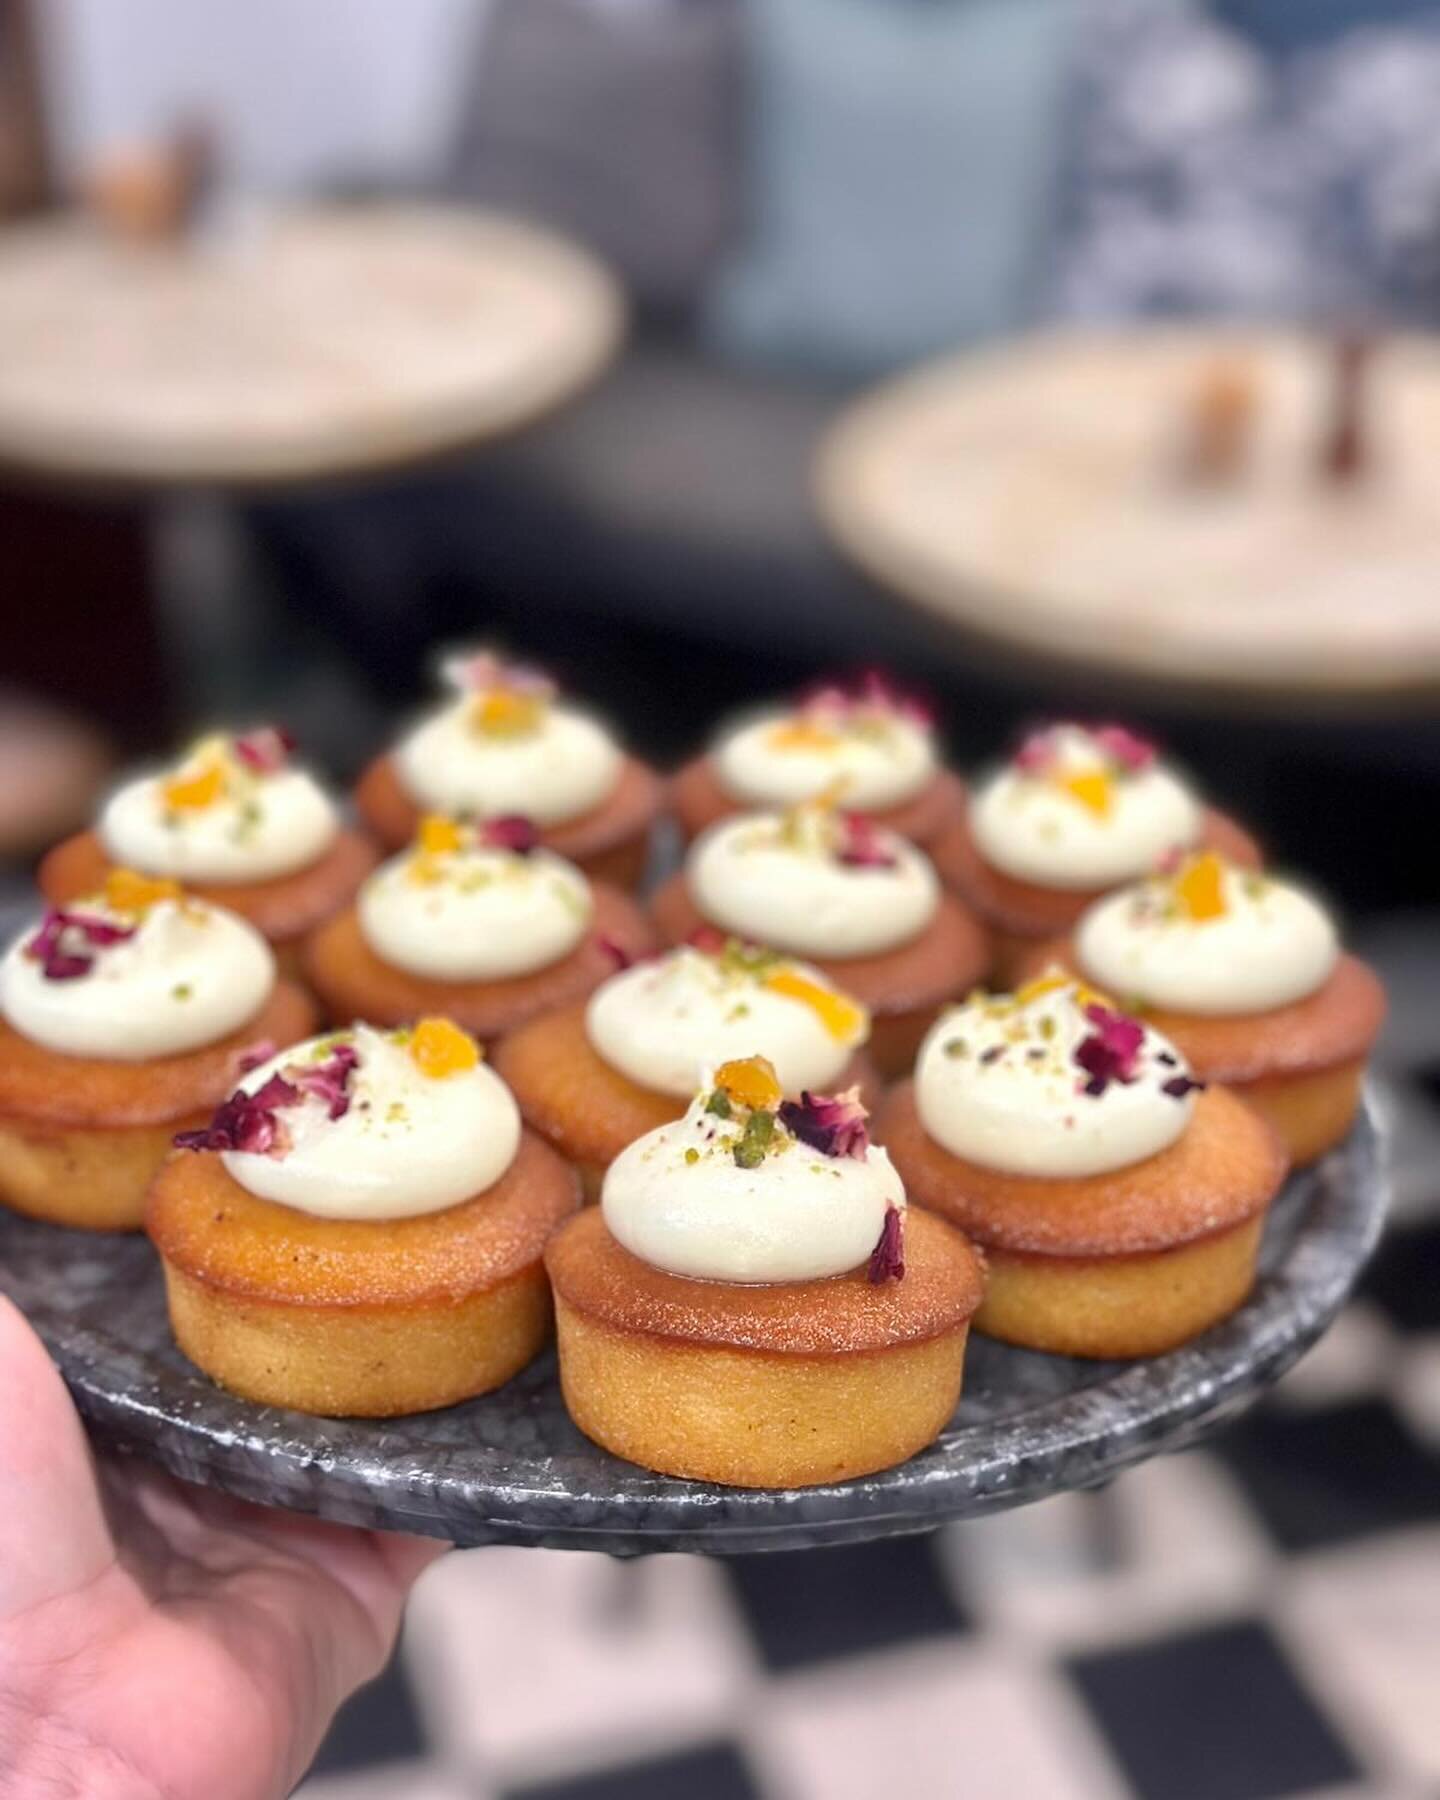 Start your Friday with one of our delicious gluten free orange cakes! #orangecake #glutenfree #delicioustreats #annandale